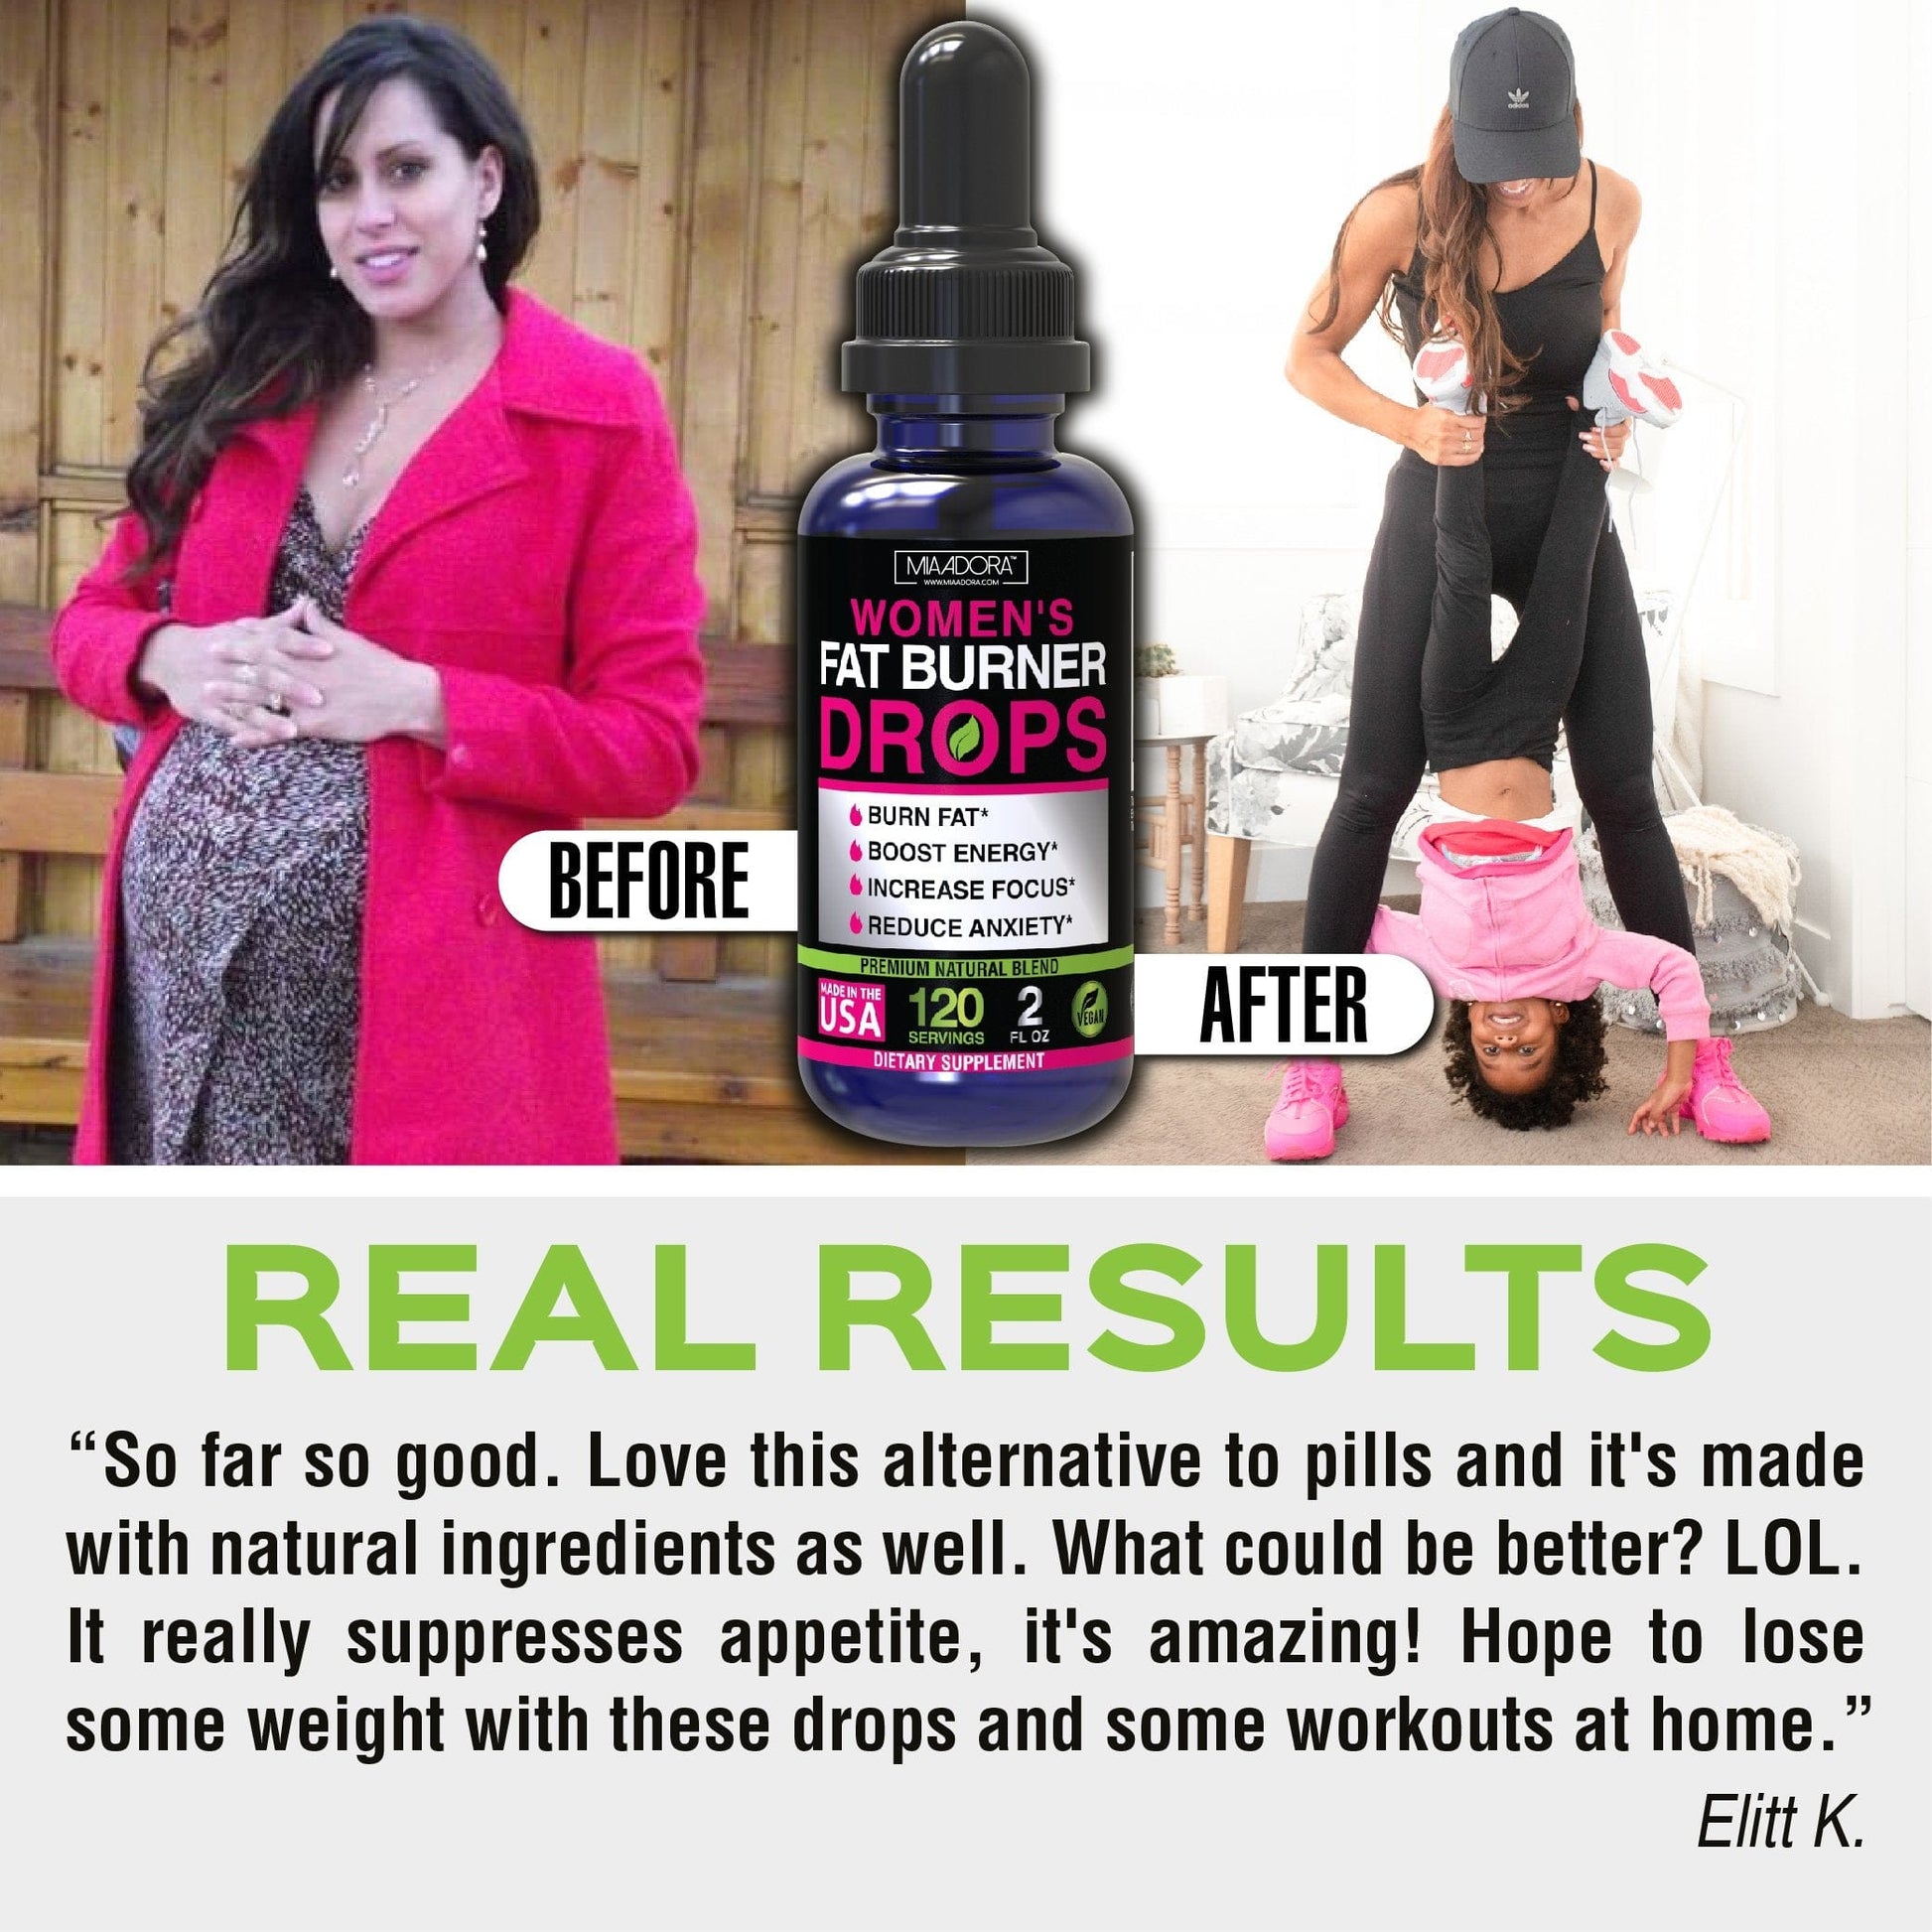 Real testimonial after trying Fat Burner Drops by Mia Adora: "so far so good. Loce this alternative to pills and it's made with natural ingredients as well. What could be better? LOL It really suppresses appetite, it's amazing! Hope to lose some weight with these drops and some woekouts at home" Elitt K.